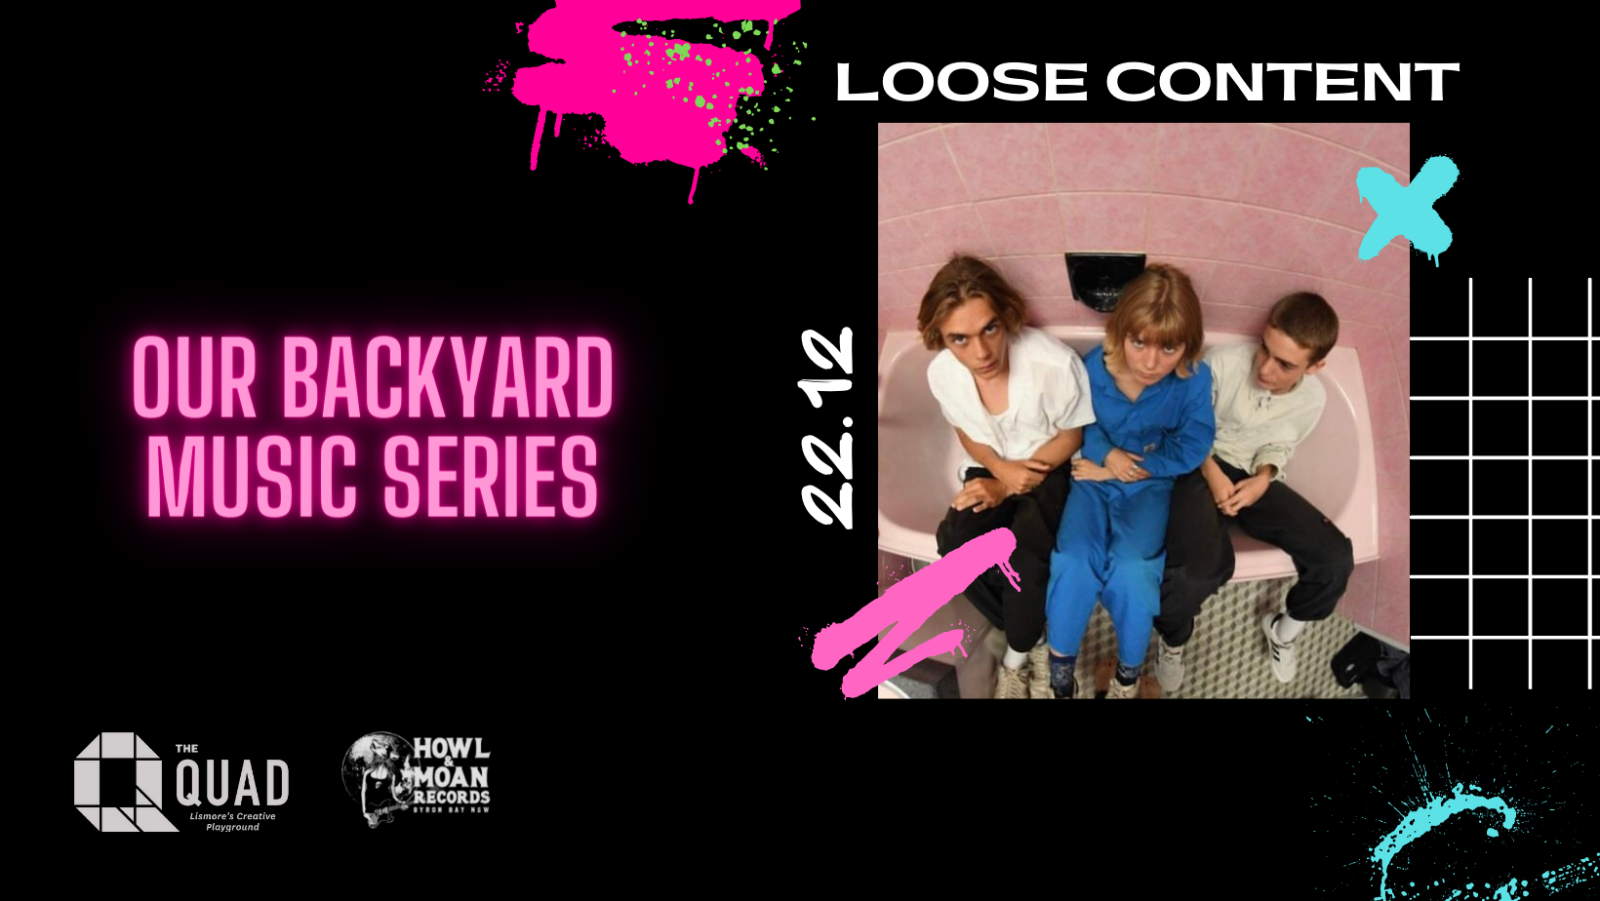 Our Backyard Music Series - Loose Content